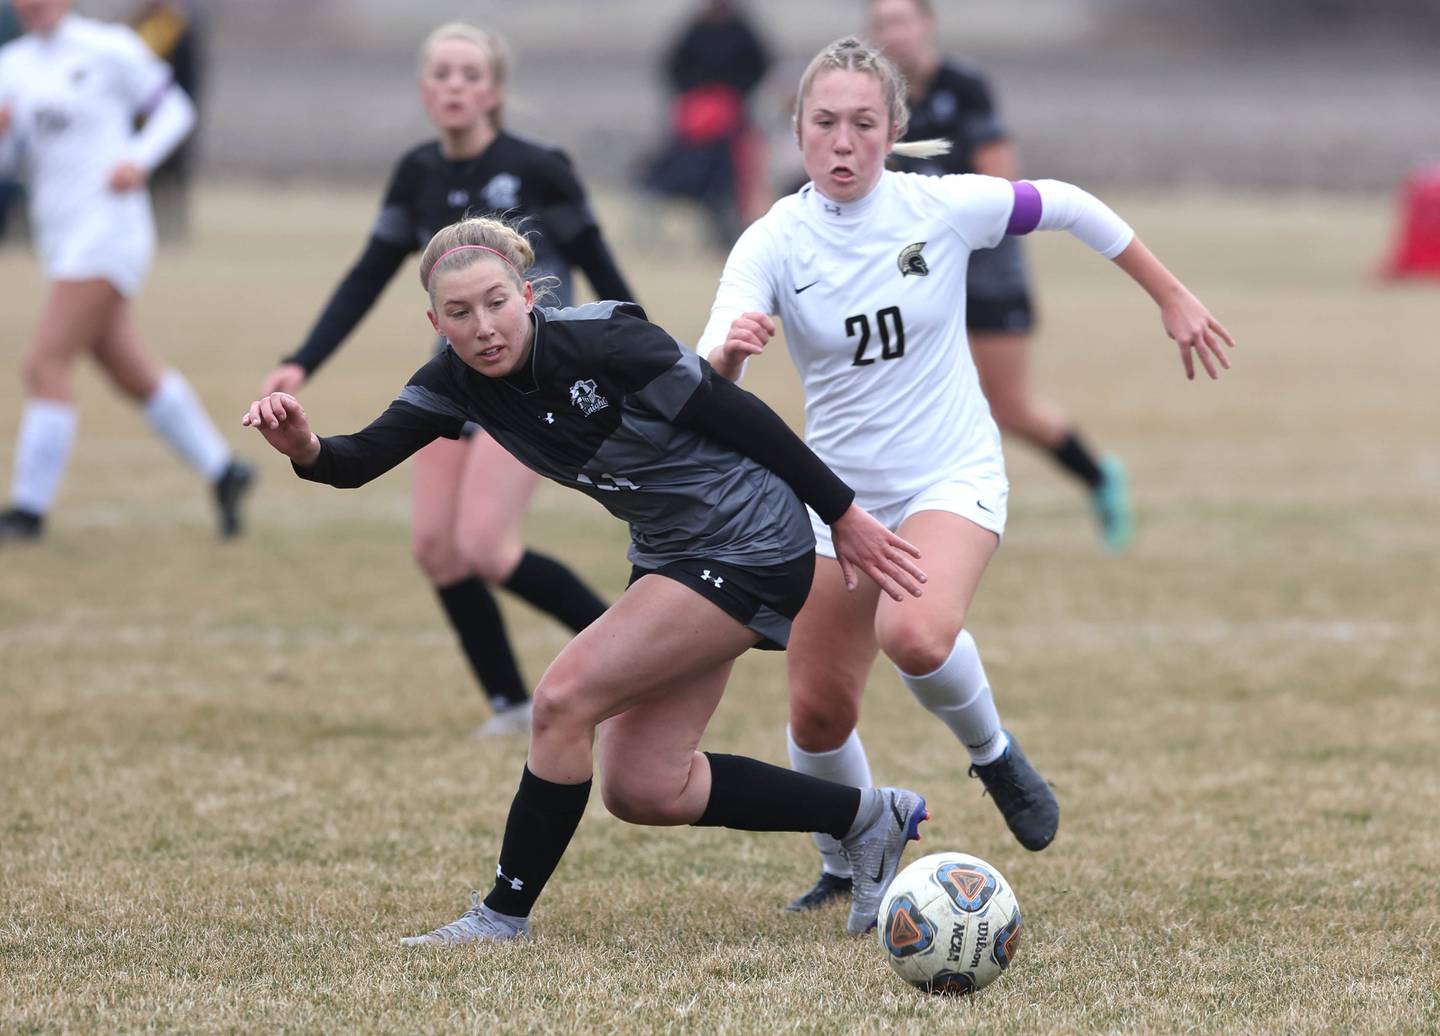 Kaneland's Madie Nitsche and Sycamore's Karli Kruizenga go after a loose ball during their game Monday, April 4, 2022, at Kaneland High School in Maple Park.